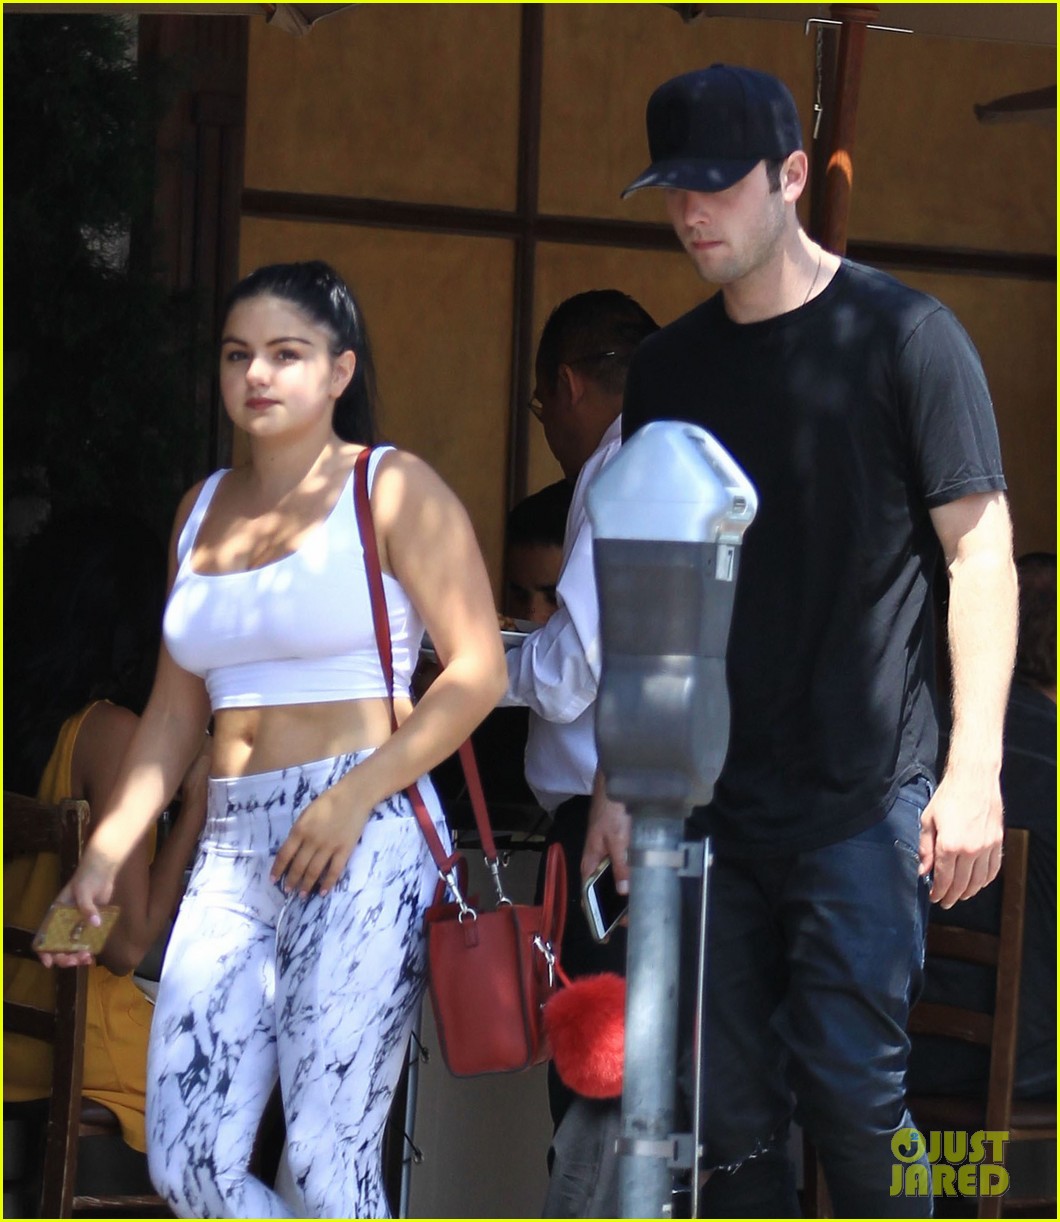 ariel winter and rumored boyfriend sterling beaumon grab lunch in beverly hills 01